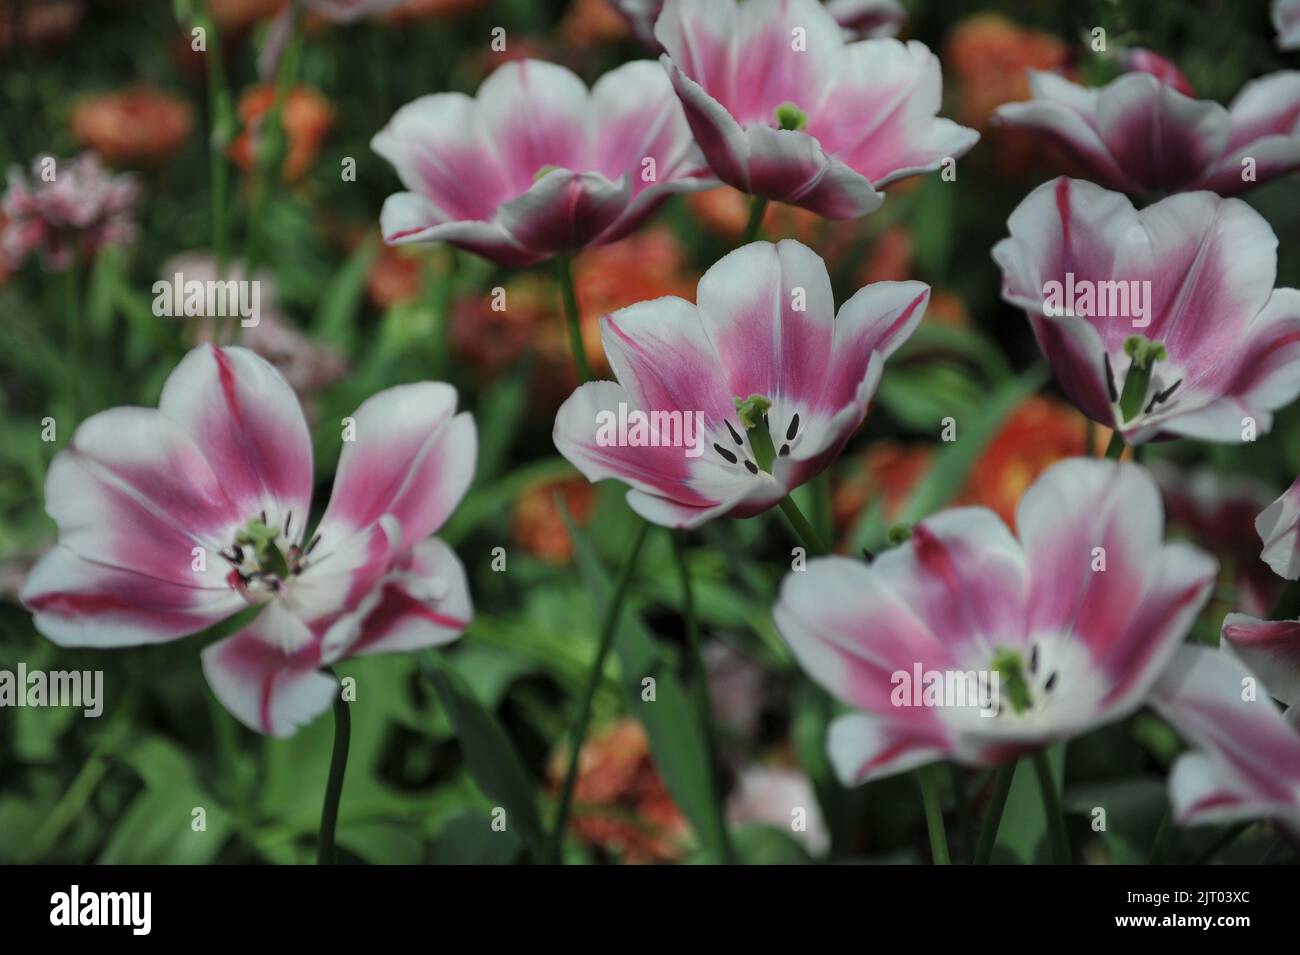 Pink and white Triumph tulips (Tulipa) Private Eyes bloom in a garden in April Stock Photo